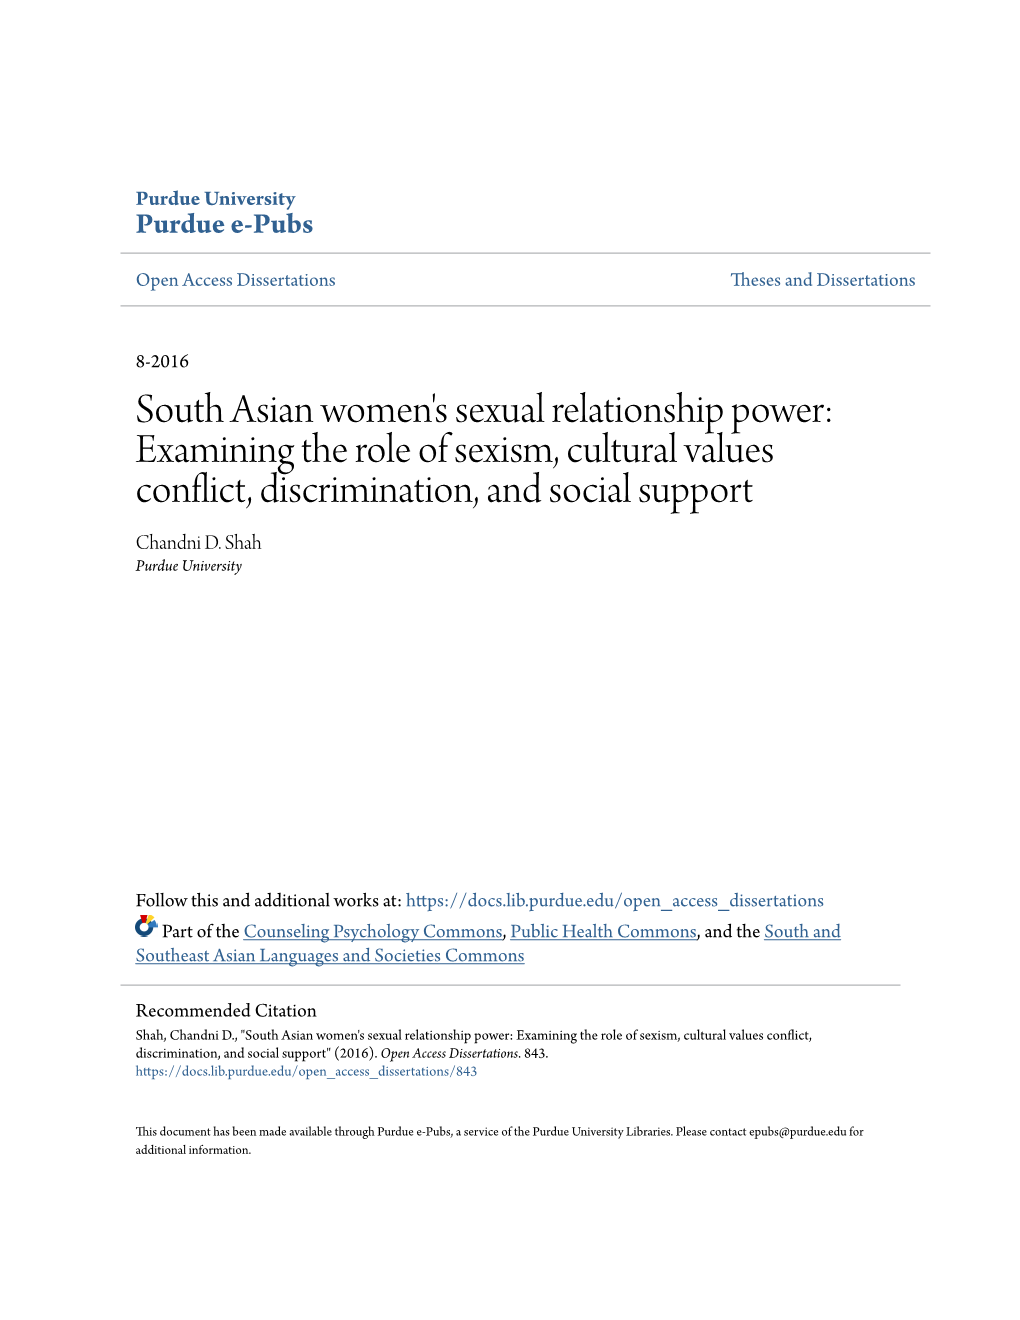 South Asian Women's Sexual Relationship Power: Examining the Role of Sexism, Cultural Values Conflict, Discrimination, and Social Support Chandni D